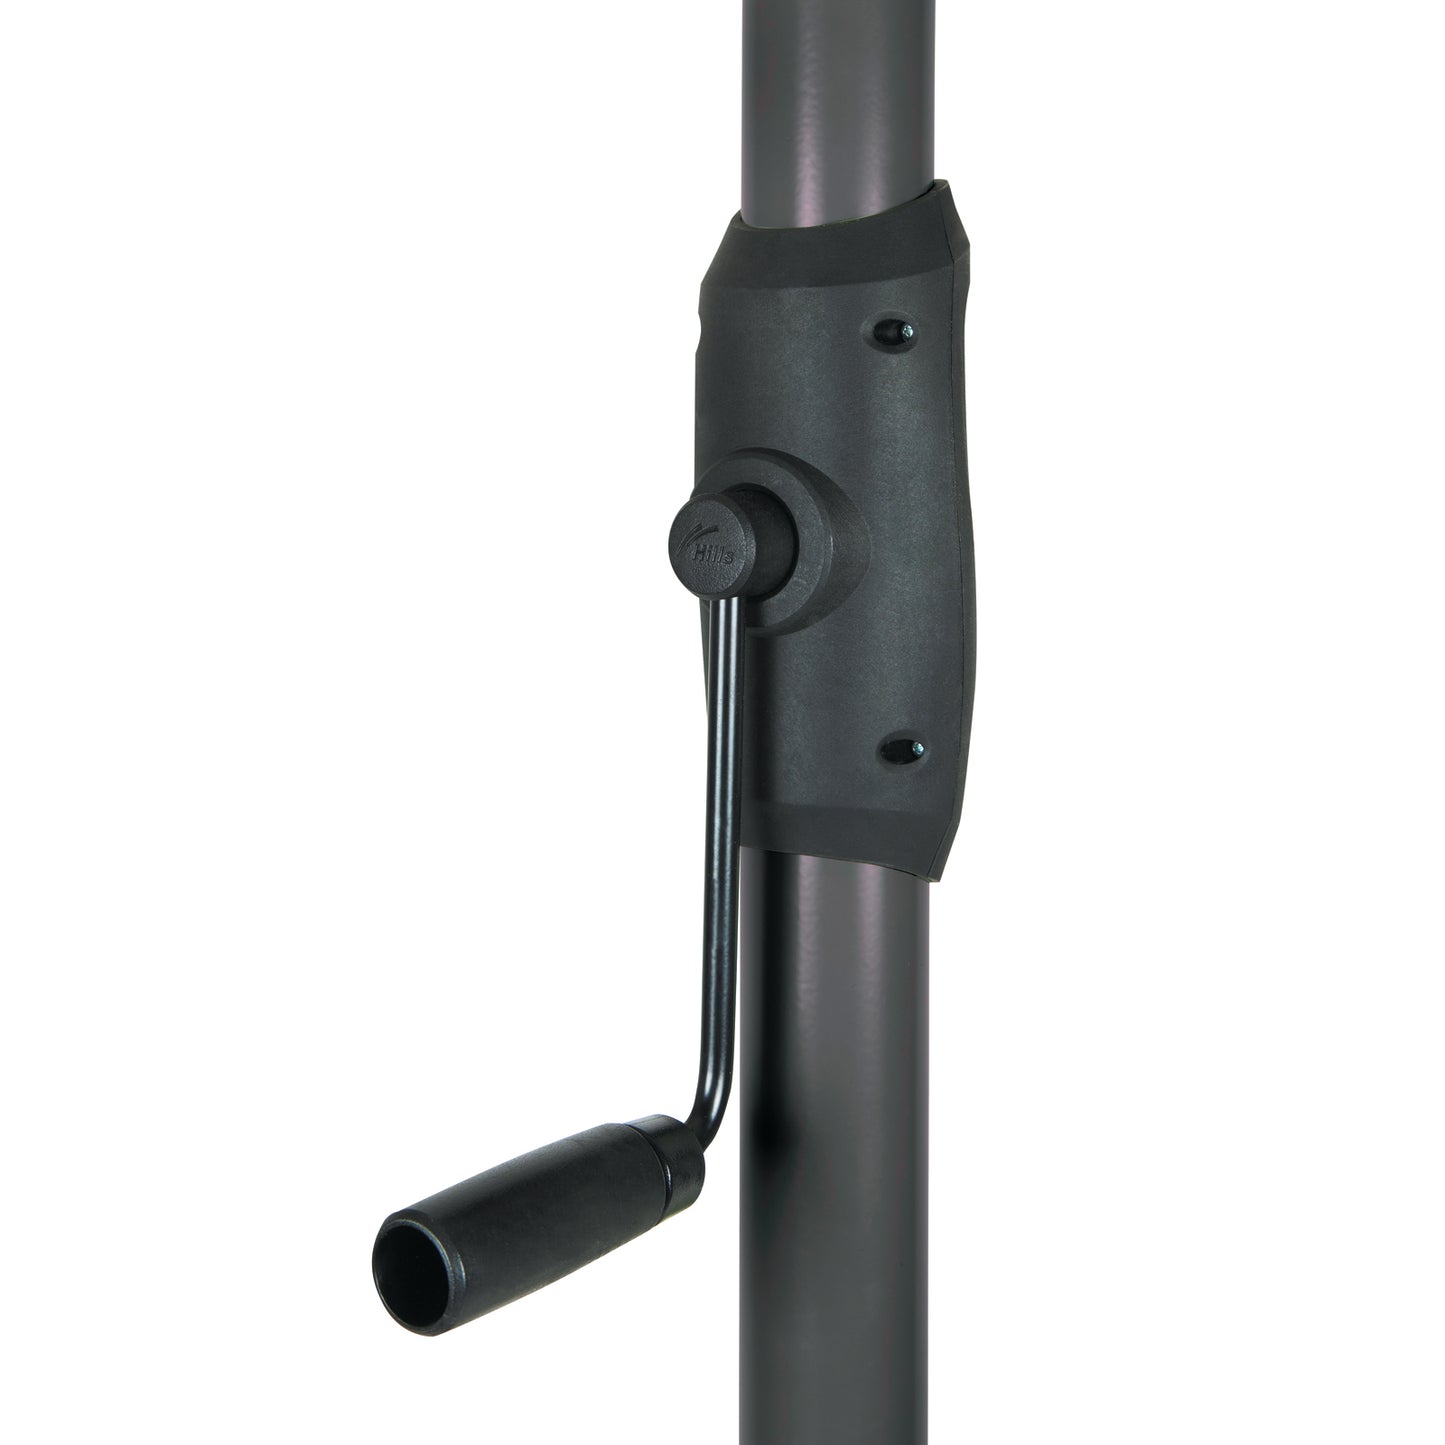 Hills Rotary 6 Hoist in Monument Grey